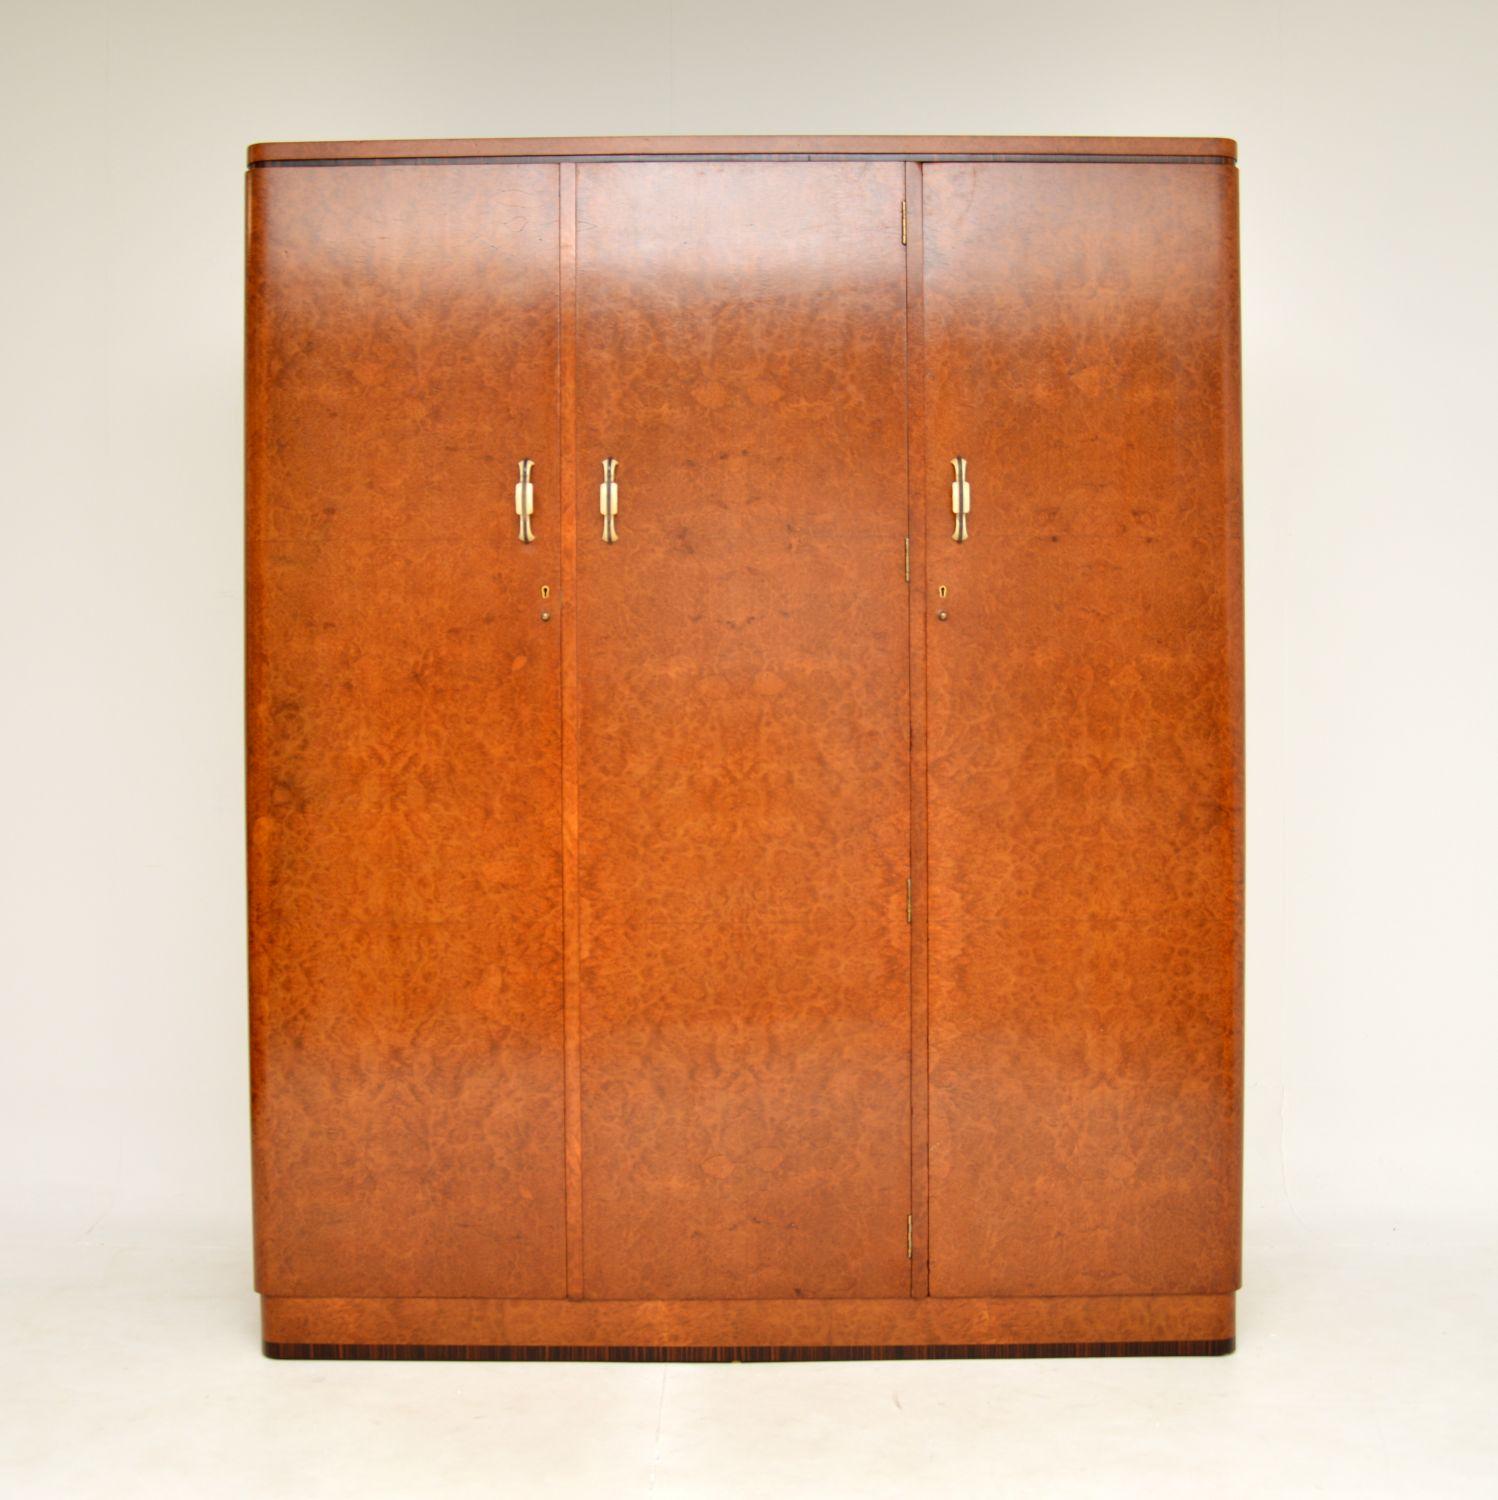 A stunning original Art Deco period burr walnut wardrobe. This was made in England, it dates from the 1930’s.

It is a great size and is of exceptional quality. There are amazing burr walnut grain patterns throughout, with rosewood banding on the